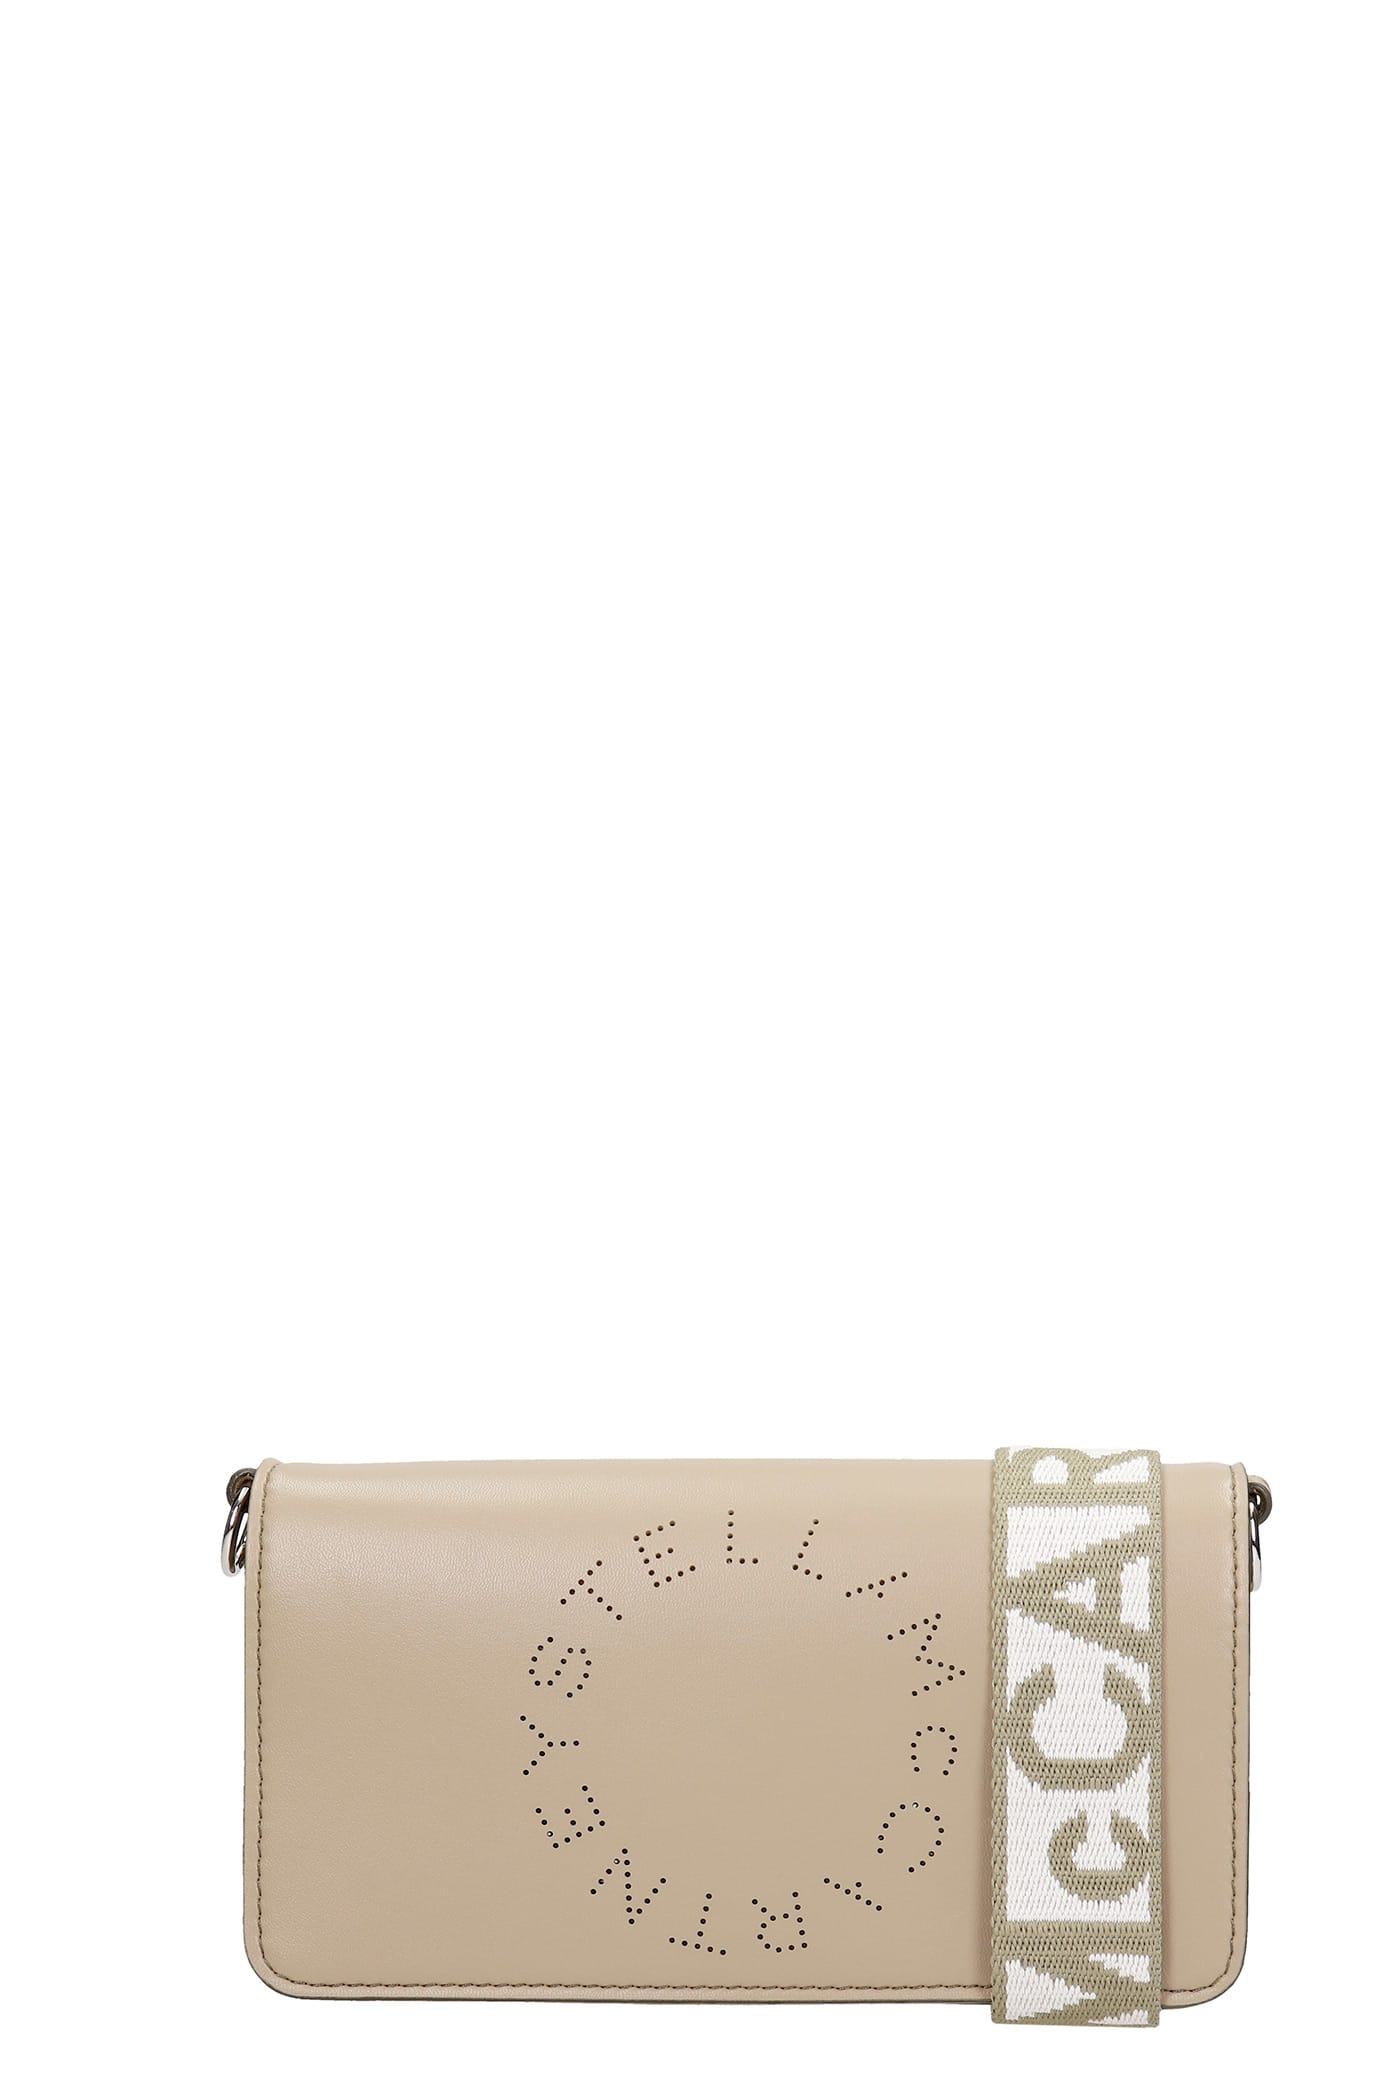 Stella McCartney Clutch In Taupe Faux Leather